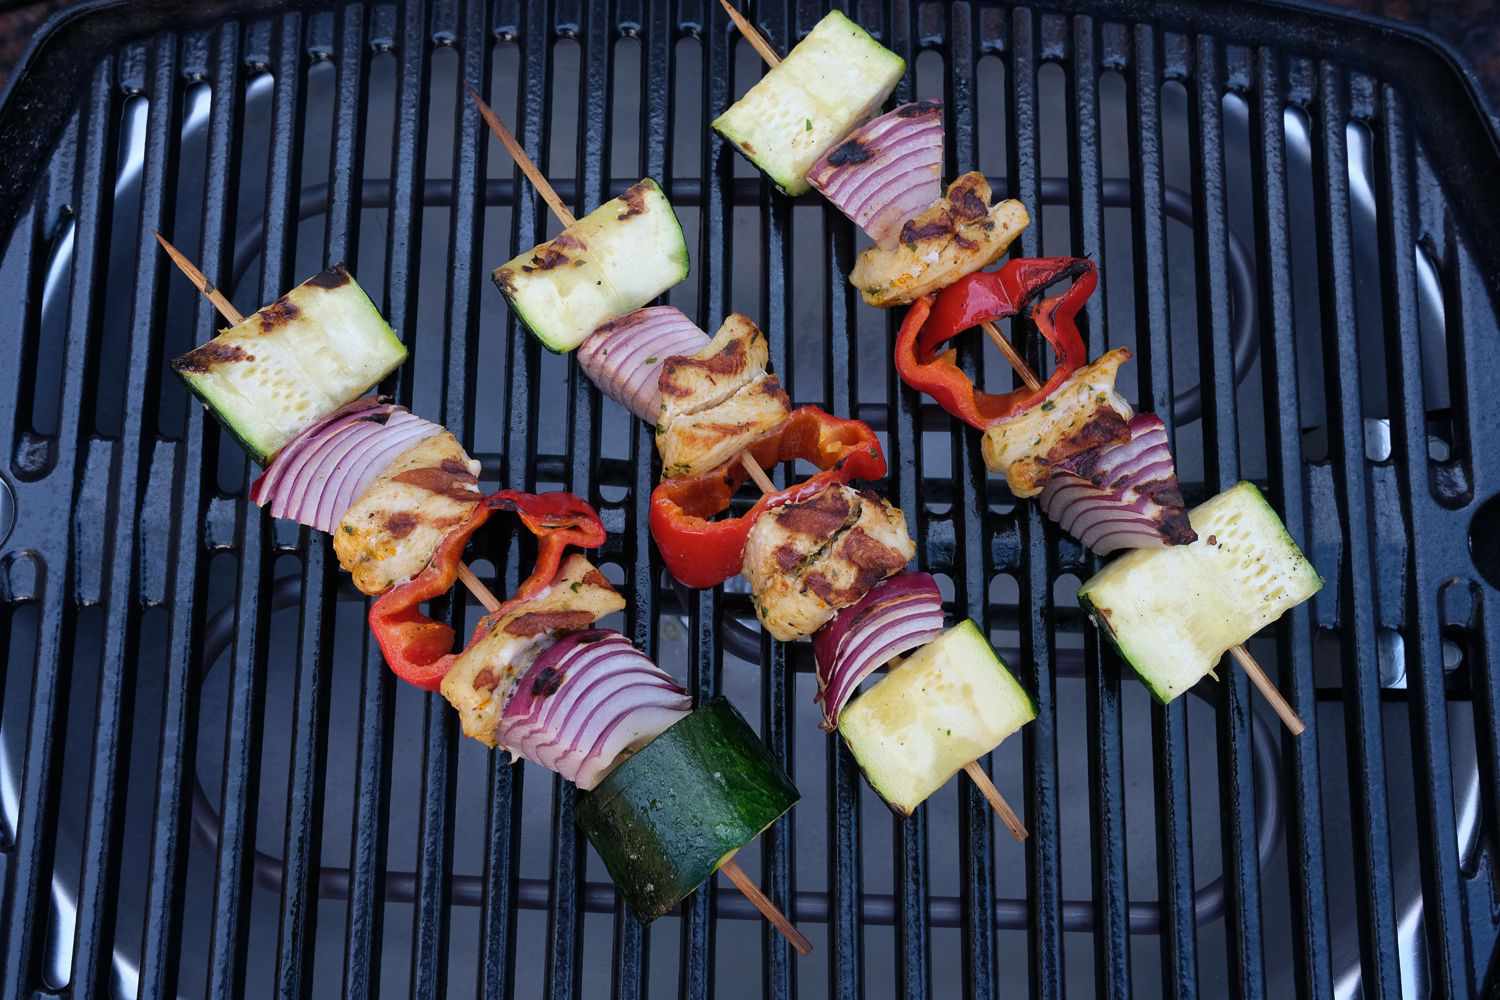 Shish kebabs grilling on the Weber Q1400 Electric Grill